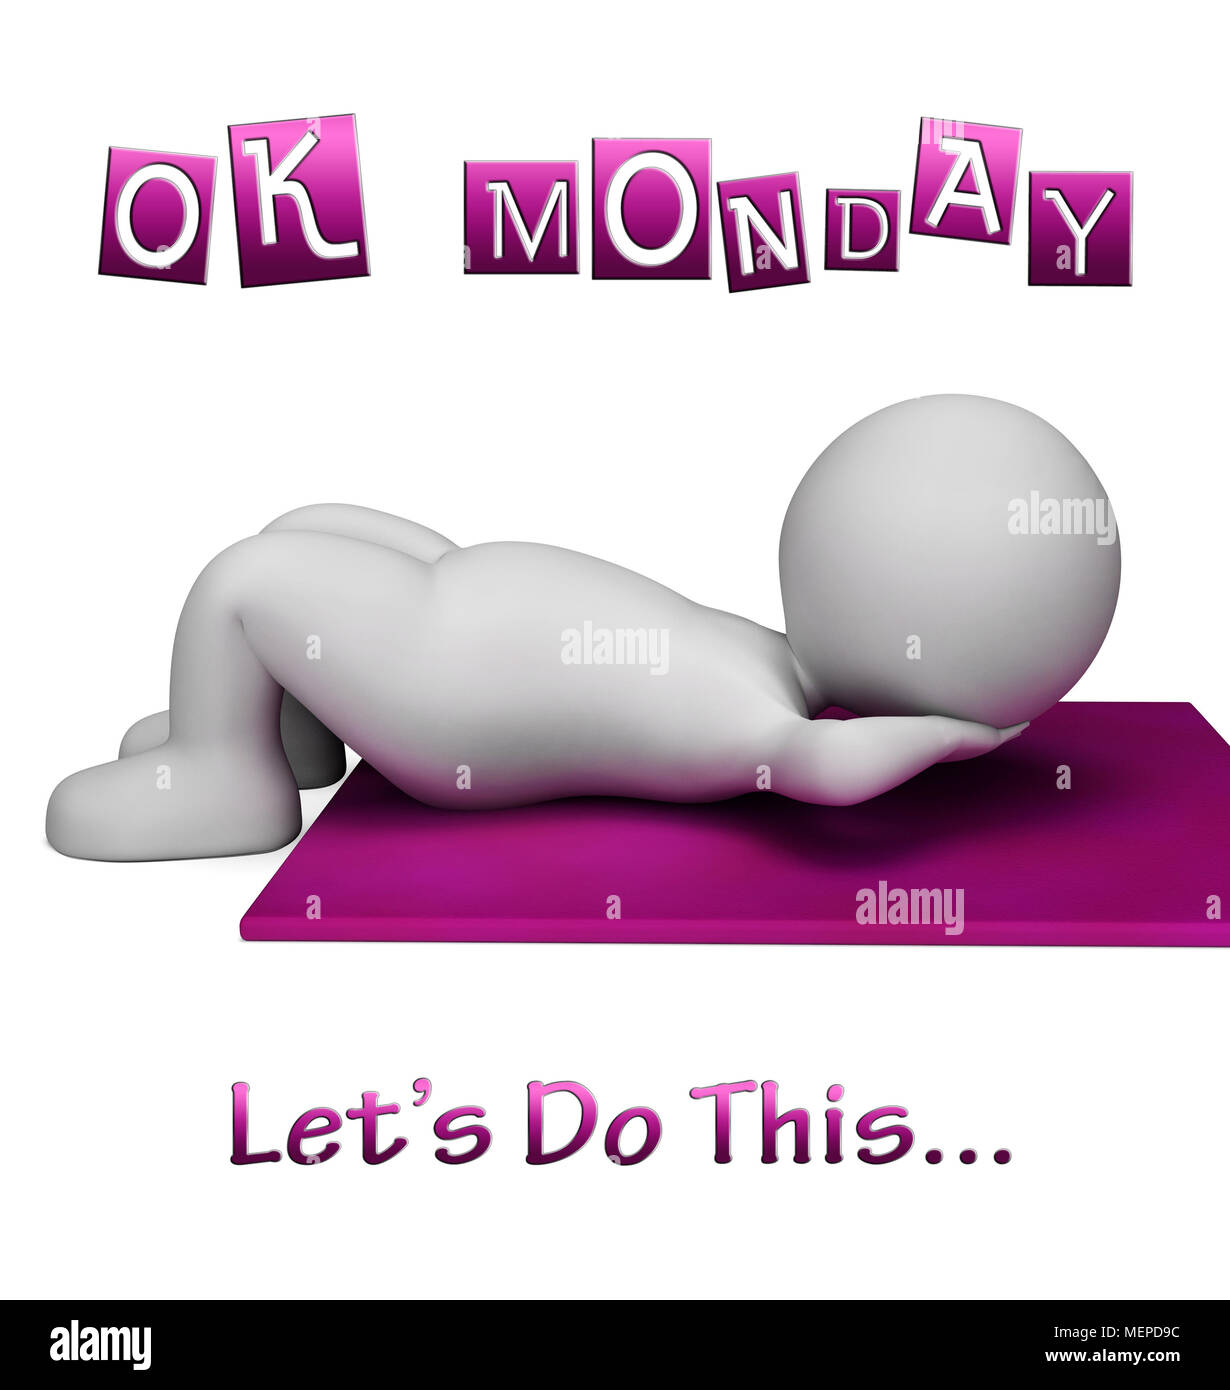 Monday Gym Motivation - Lets Do This Exercise - 3d Illustration Stock Photo